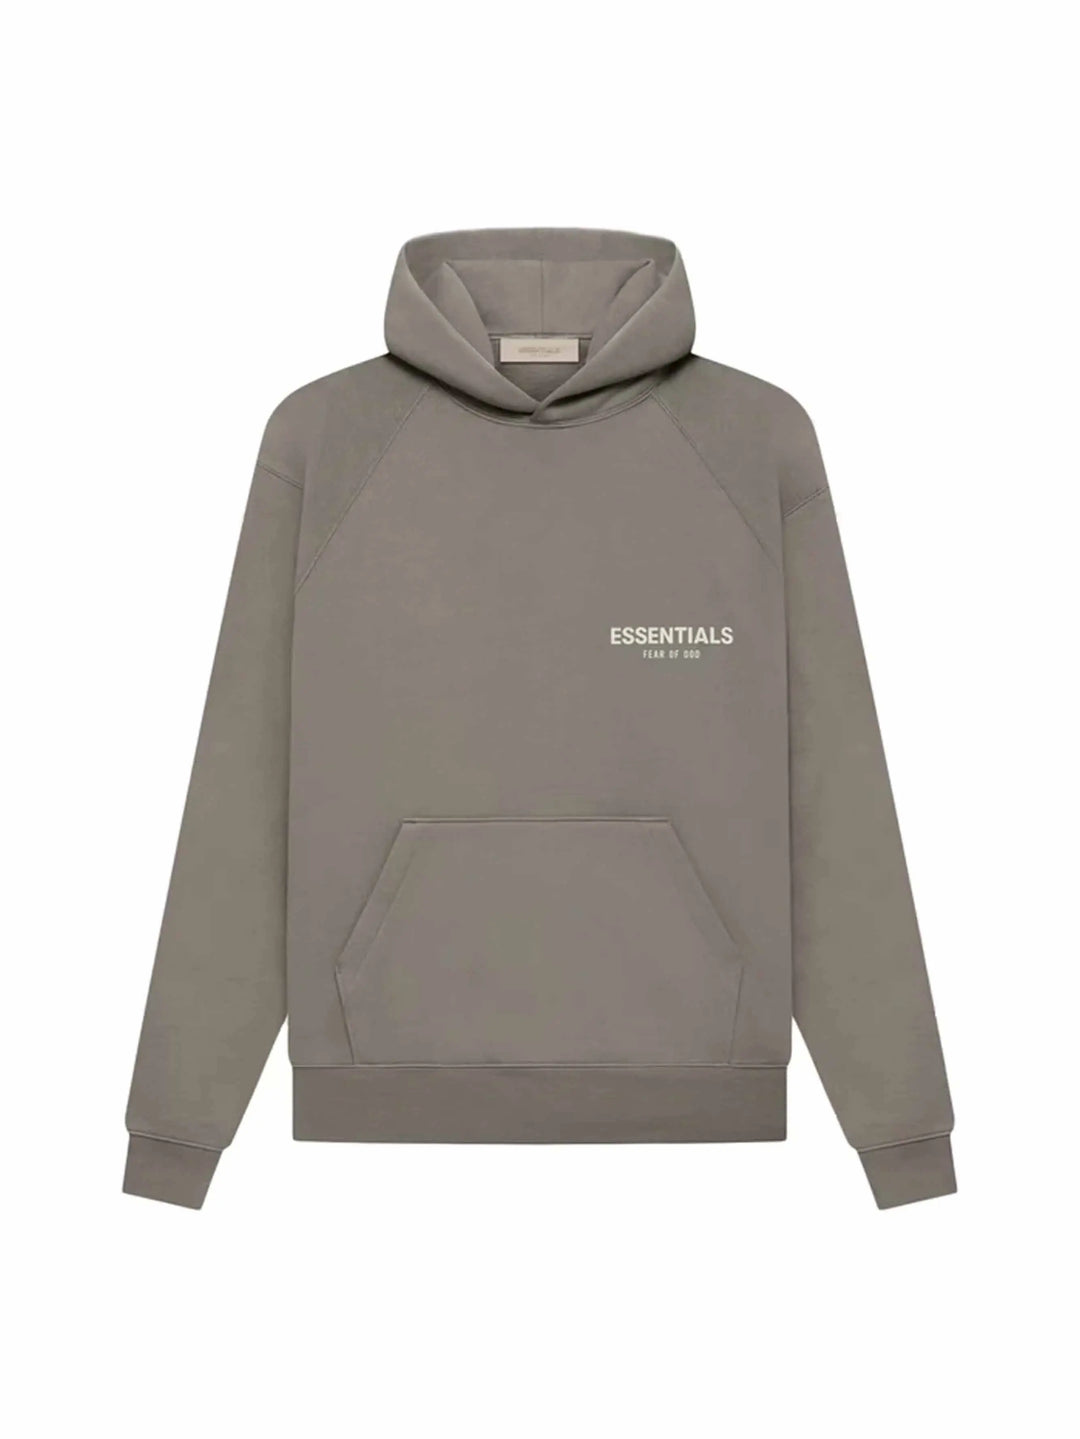 Fear of God Essentials Hoodie Desert Taupe [SS22] - Prior